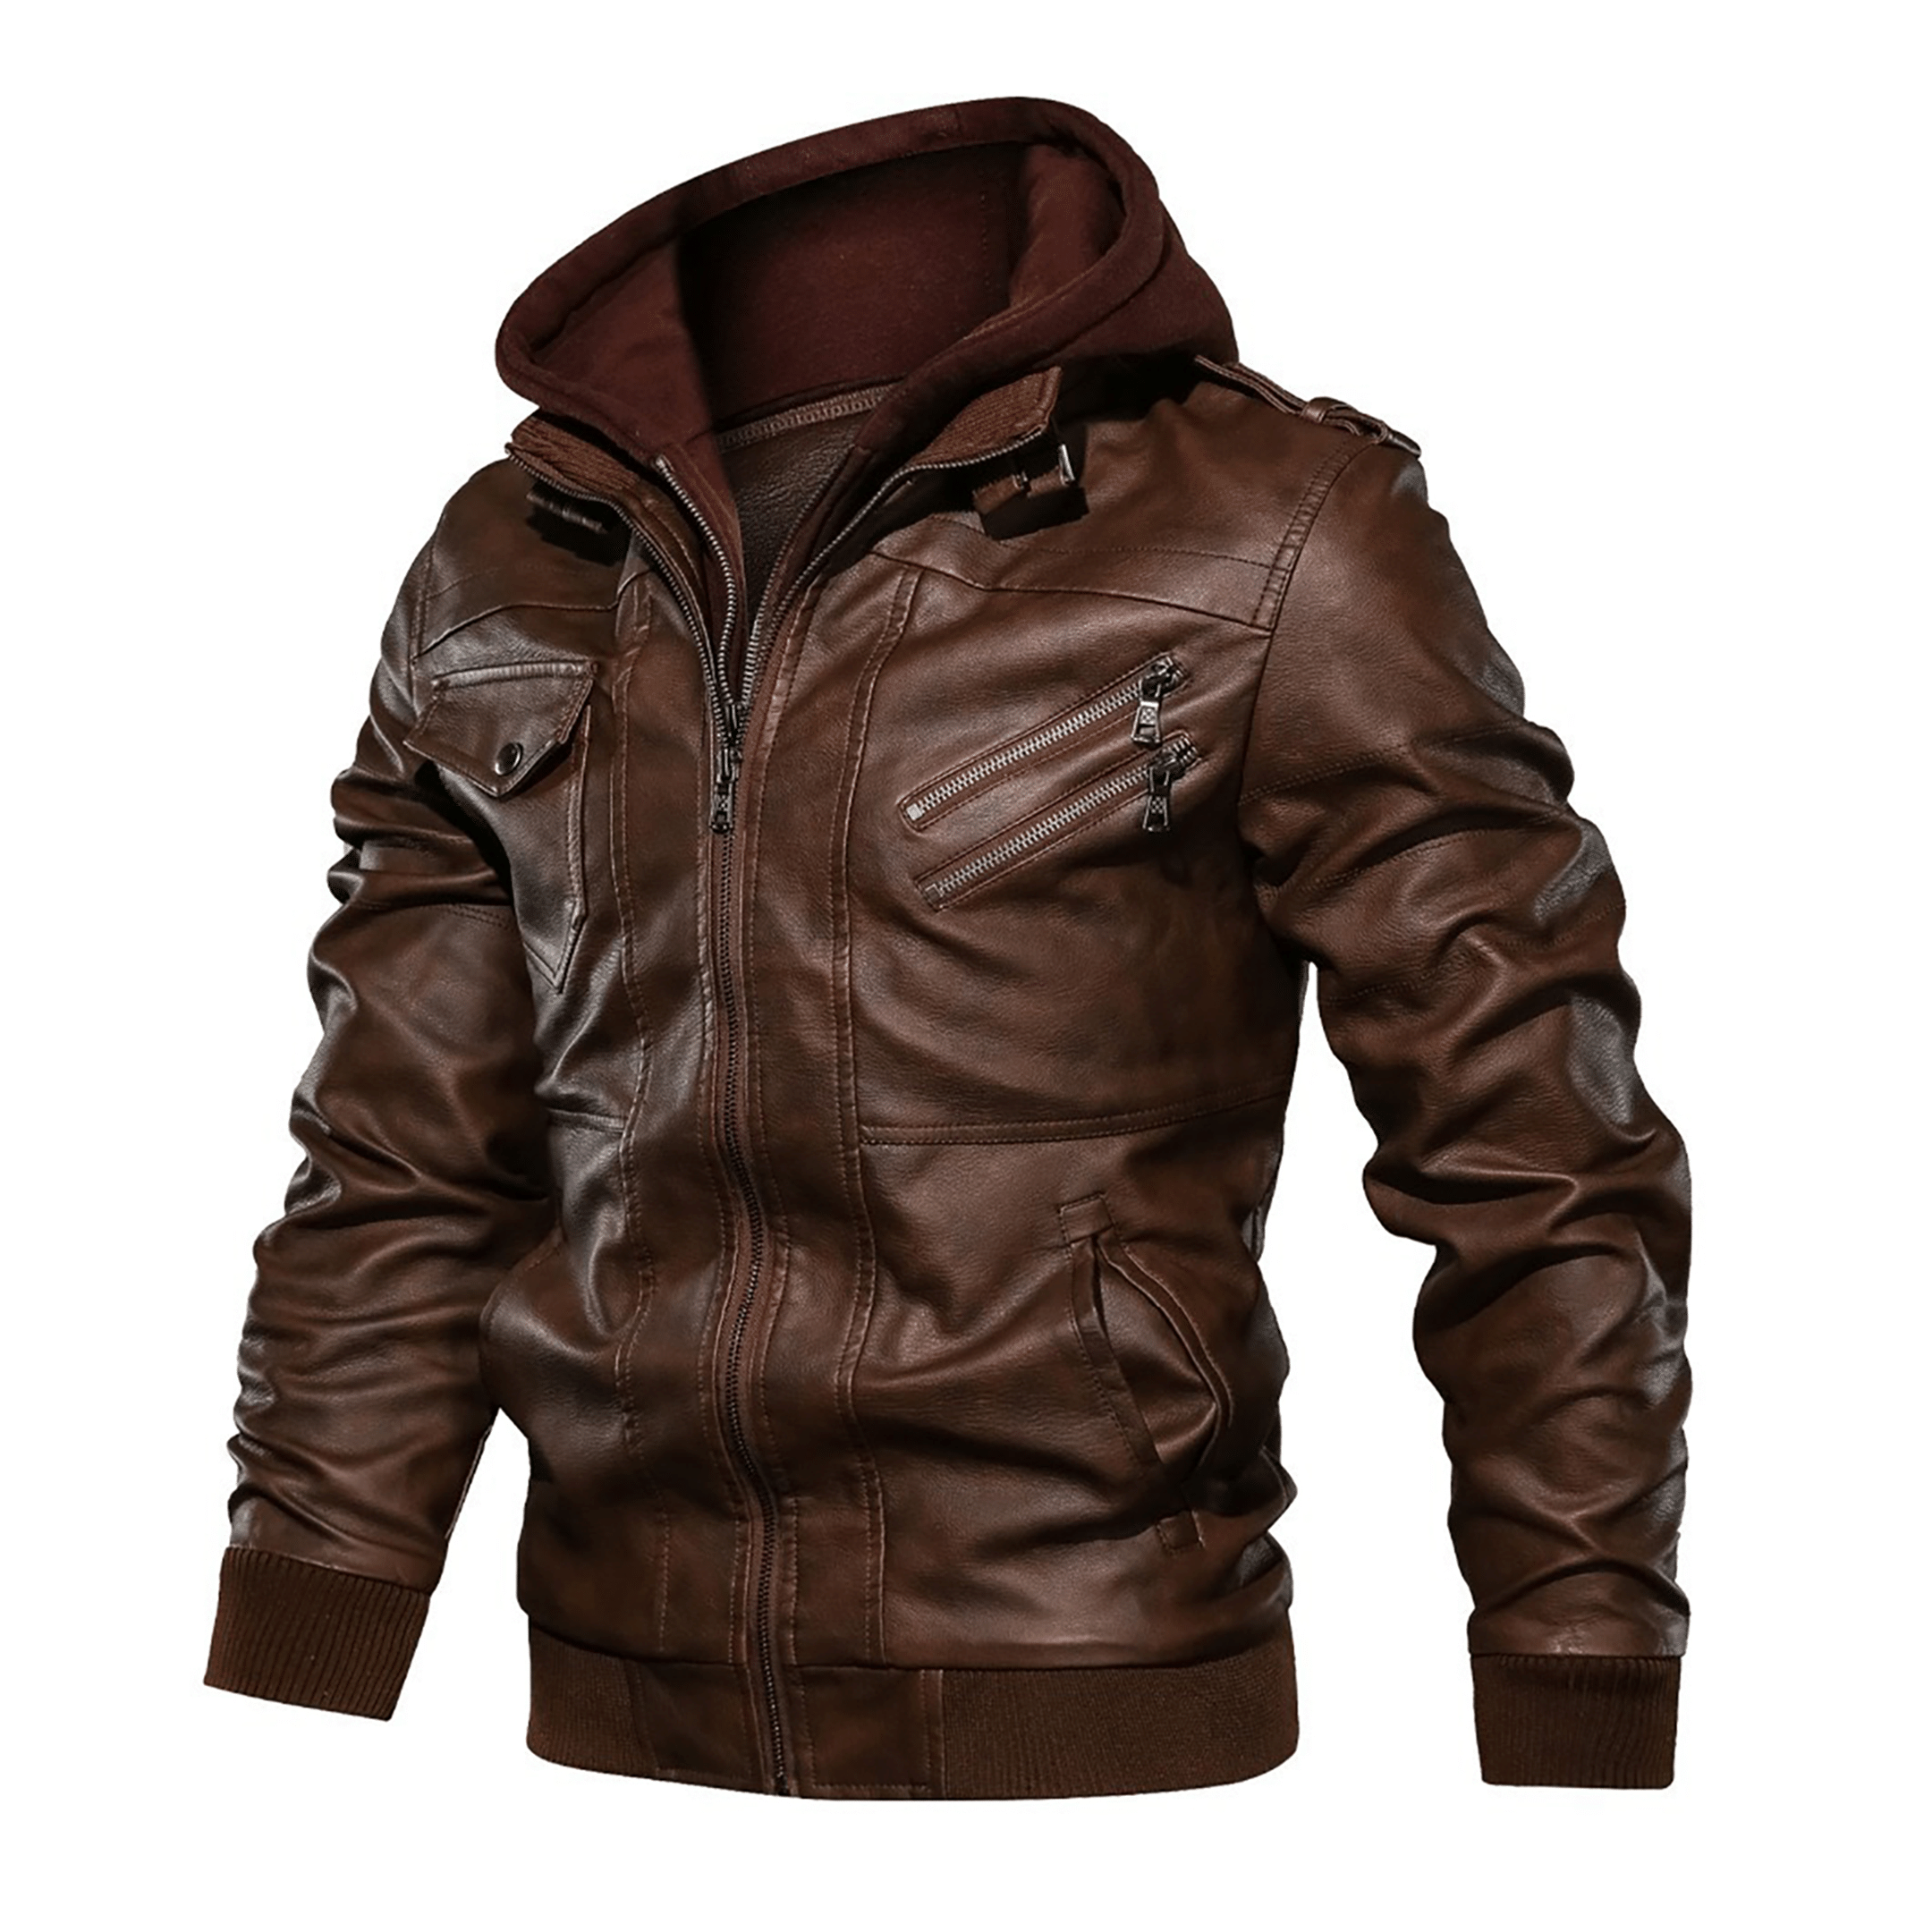 Top leather jackets and latest products 397